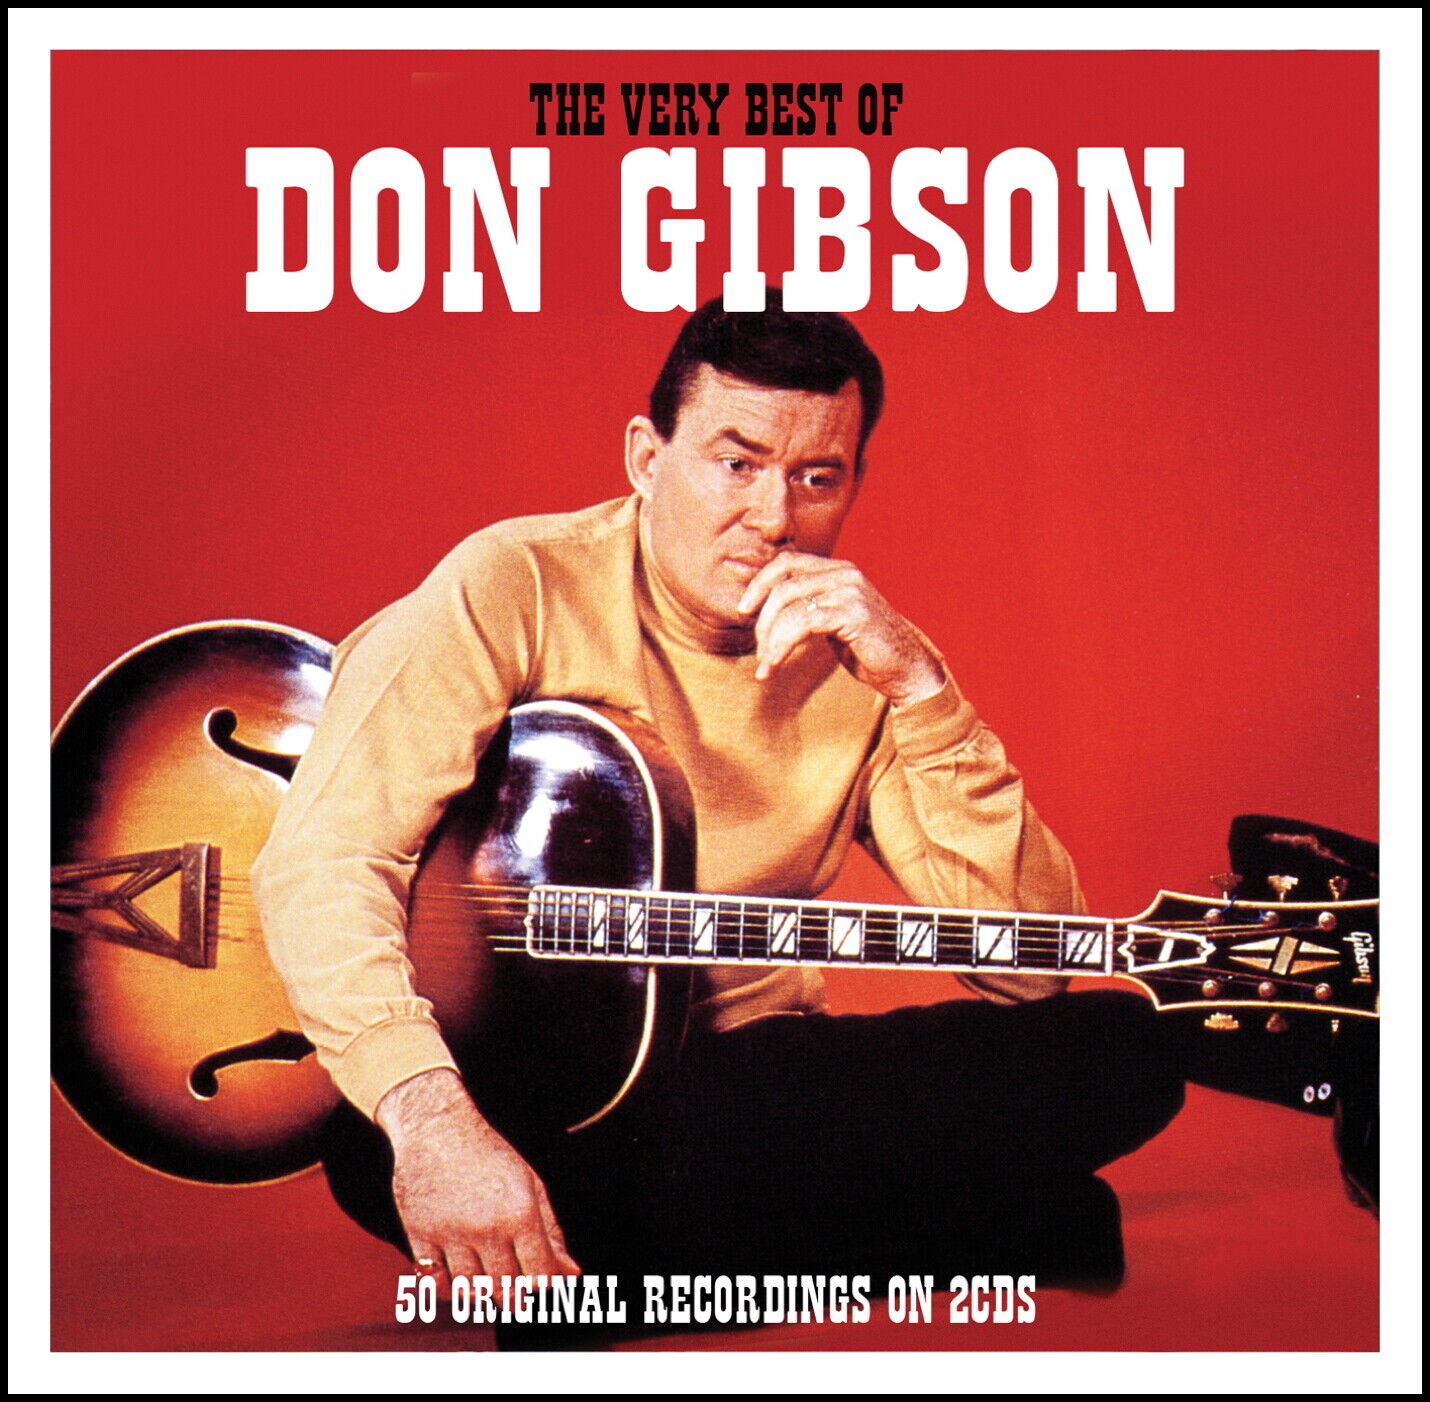 DON GIBSON * 50 Greatest Hits  * NEW 2-CD  SET * All Original Recordings